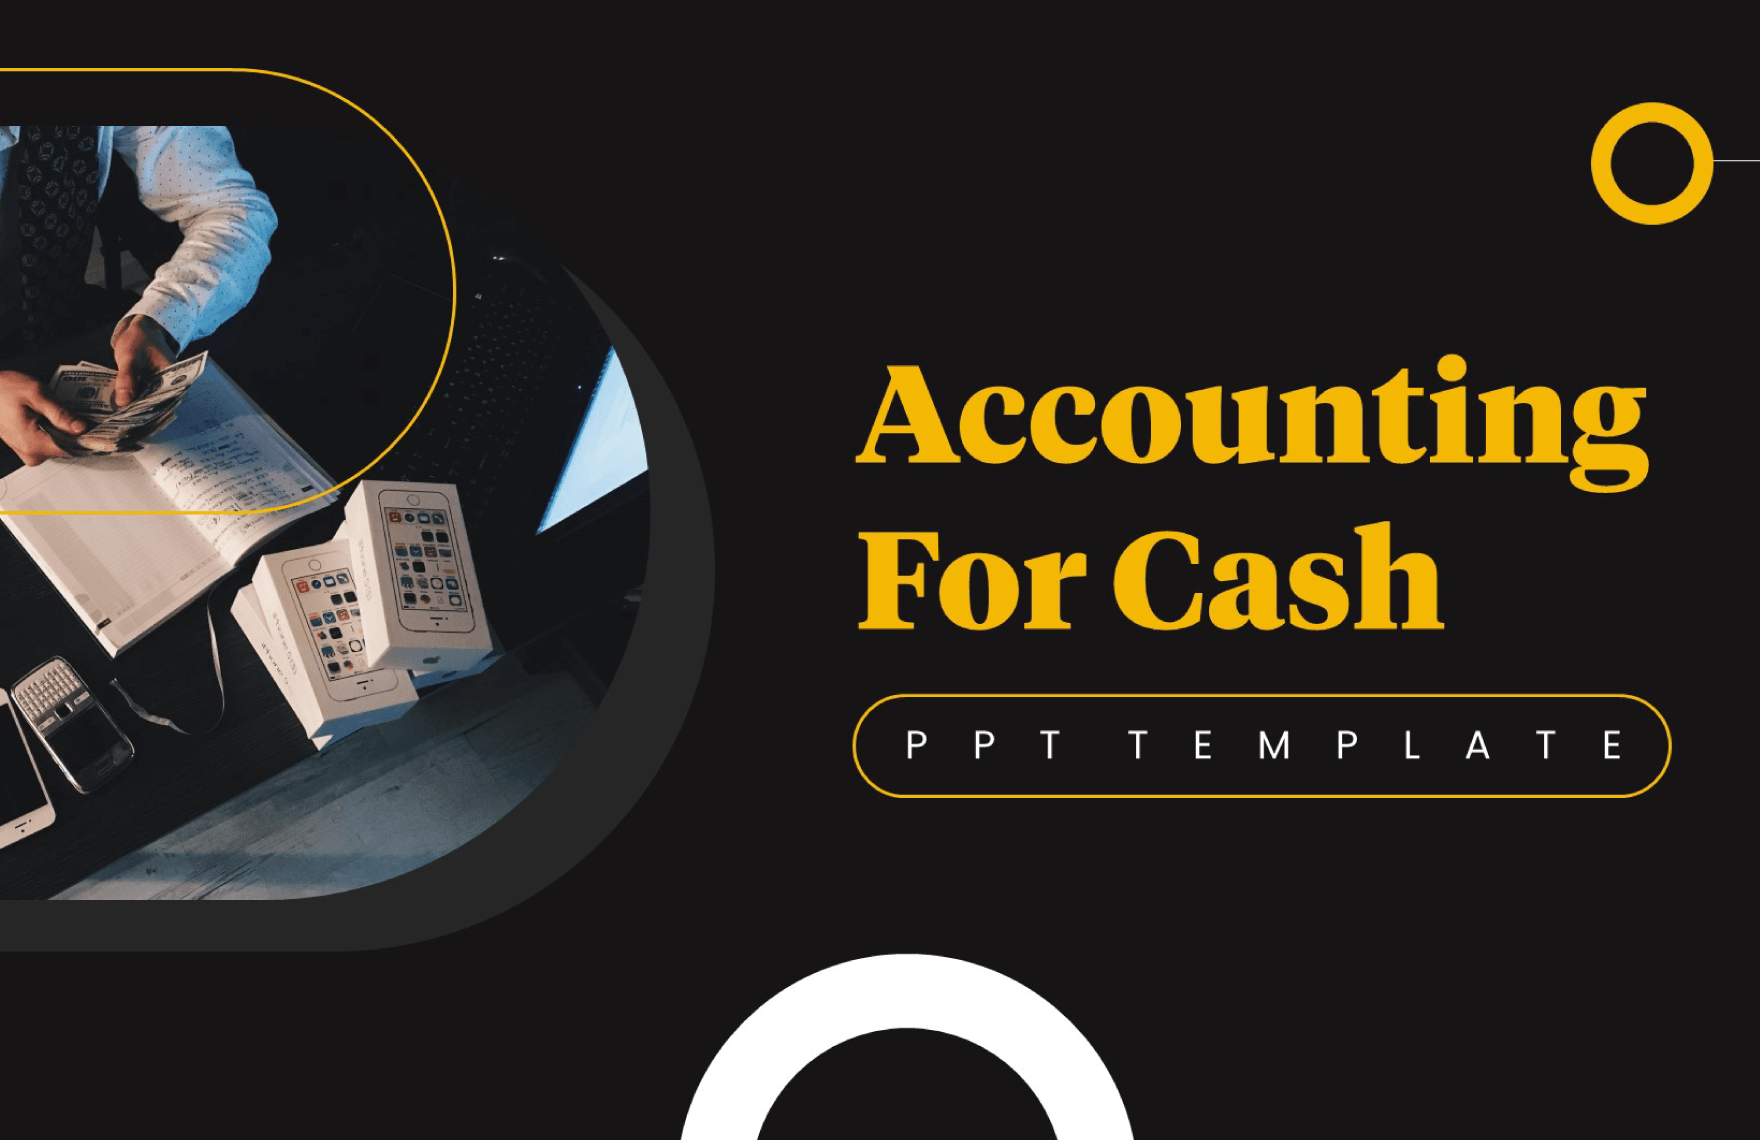 Accounting for Cash PPT Template